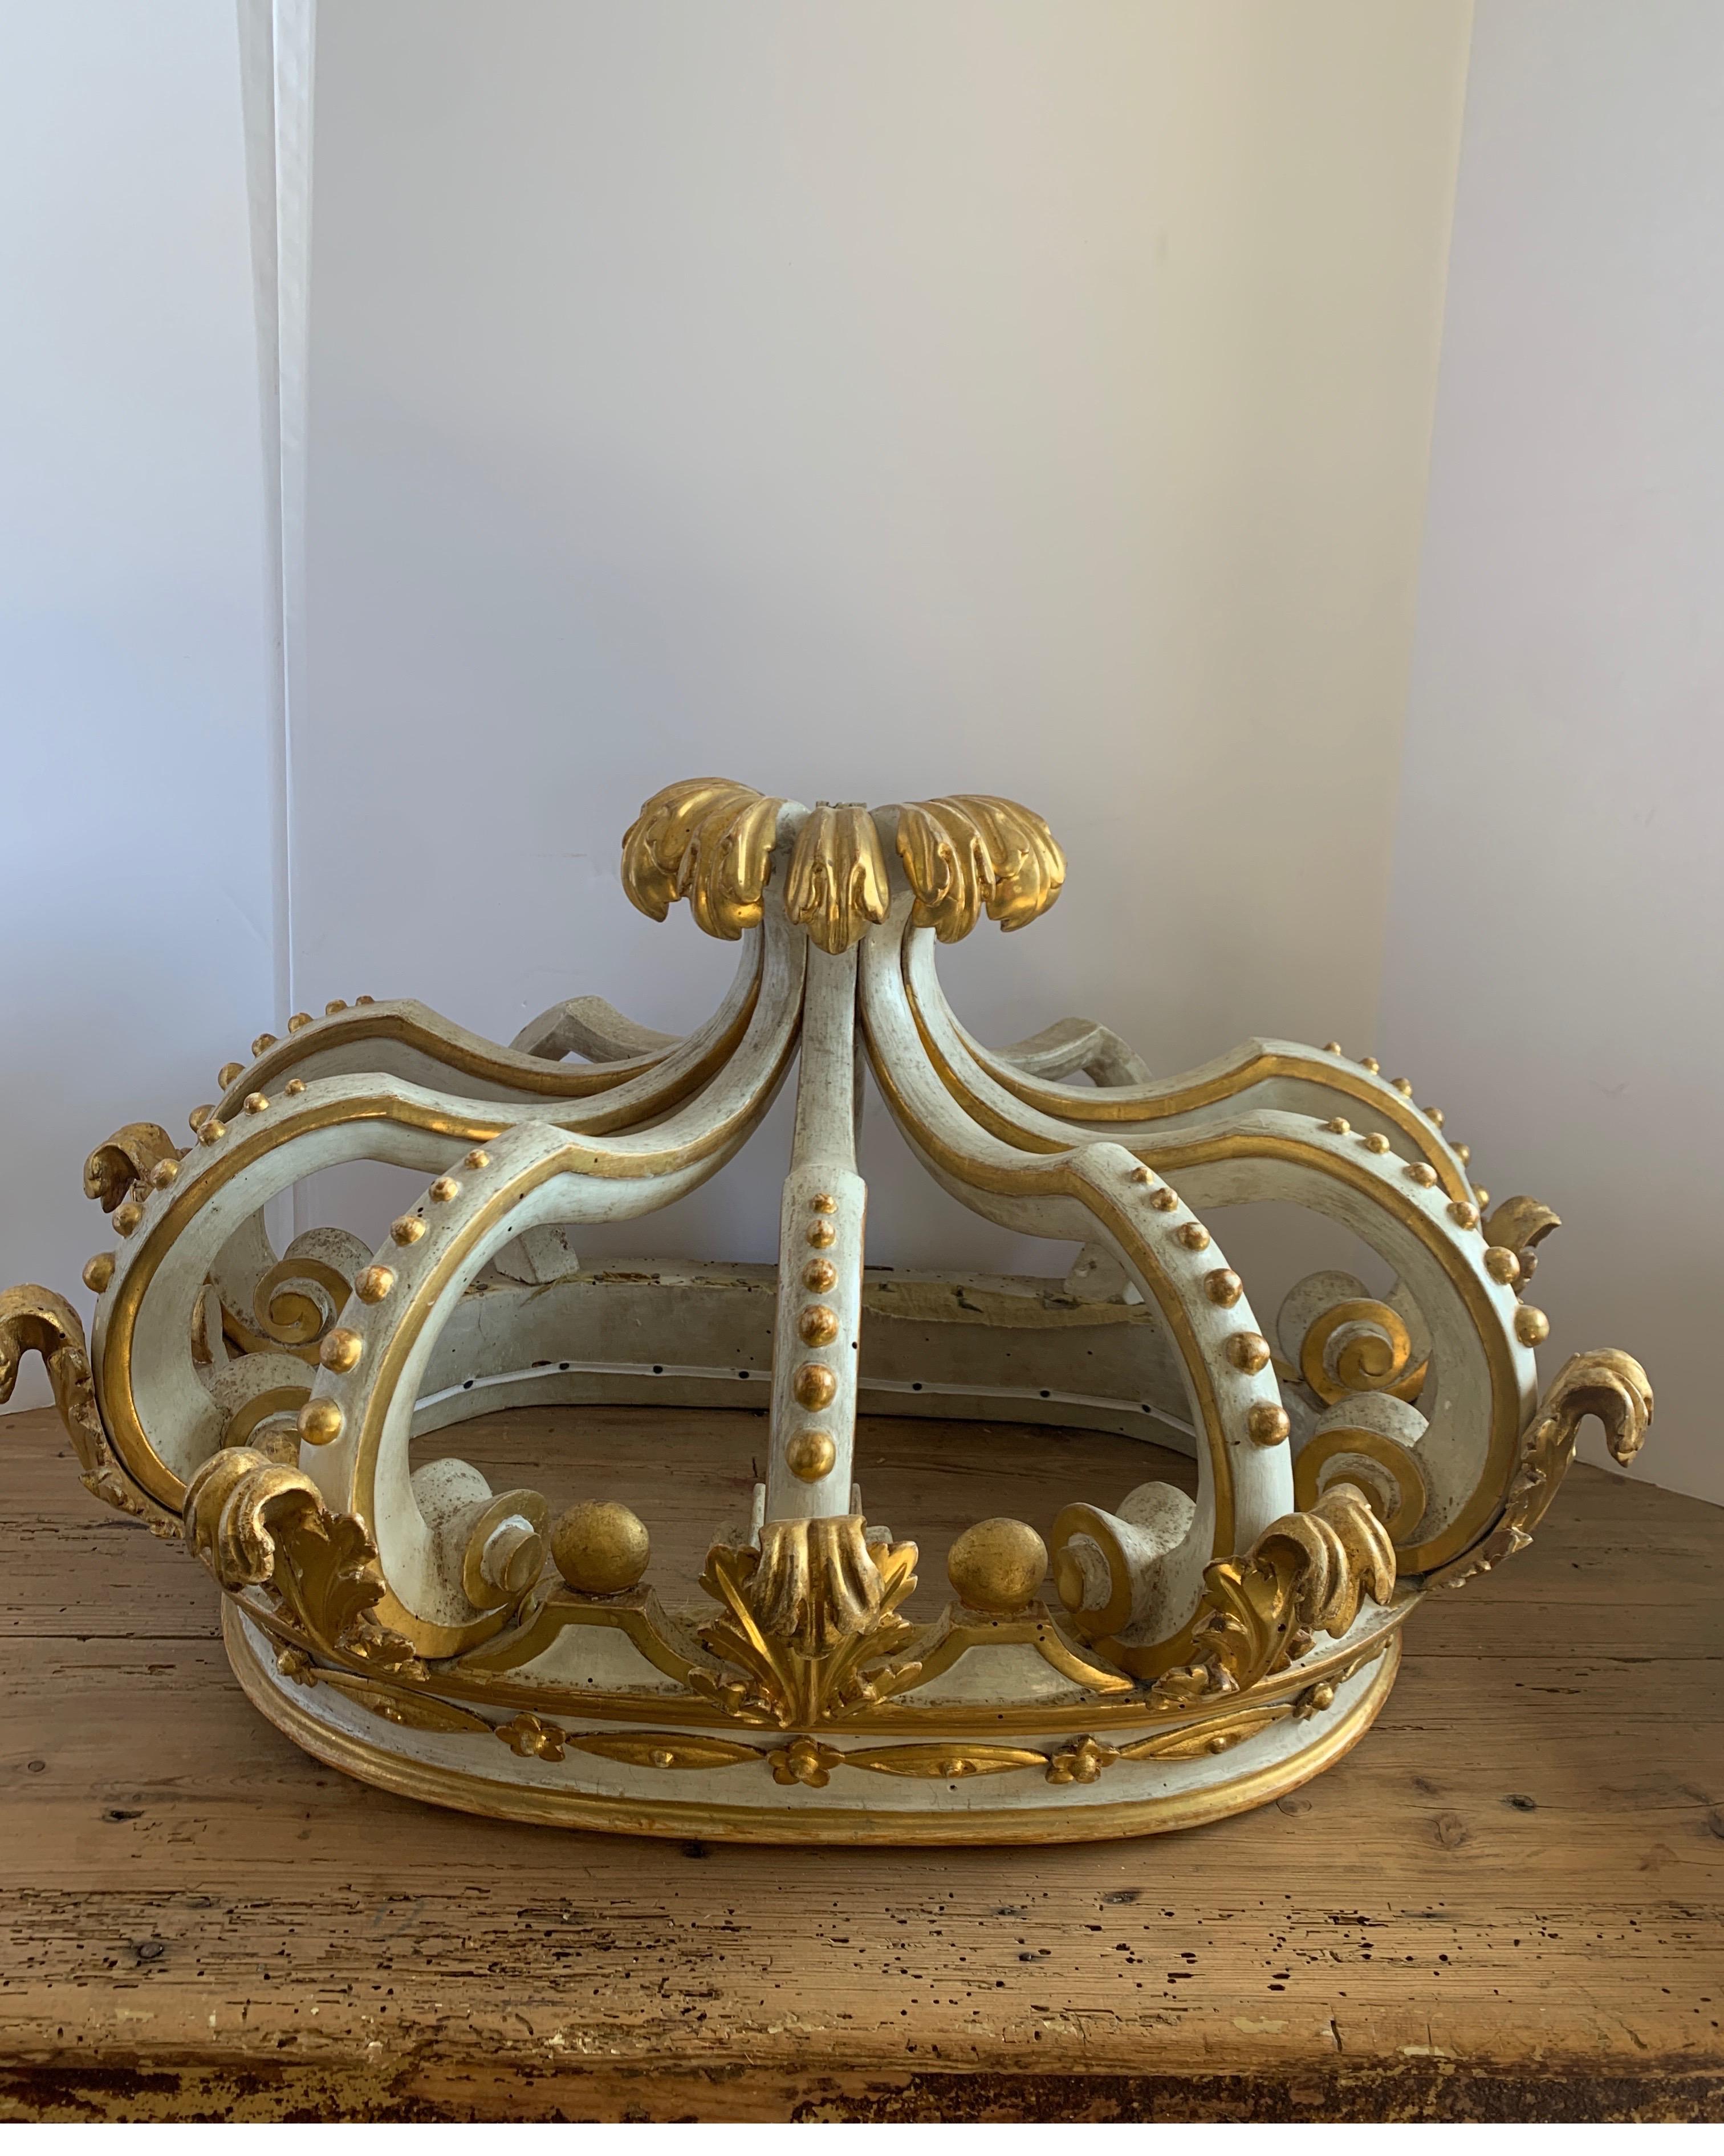 This crown was found in Italy. It’s common all over Europe to find in Catholic Cathedrals and private chapels. The finish is in very good condition for it age. The cross at the top is removable and the height without it is 14 t.